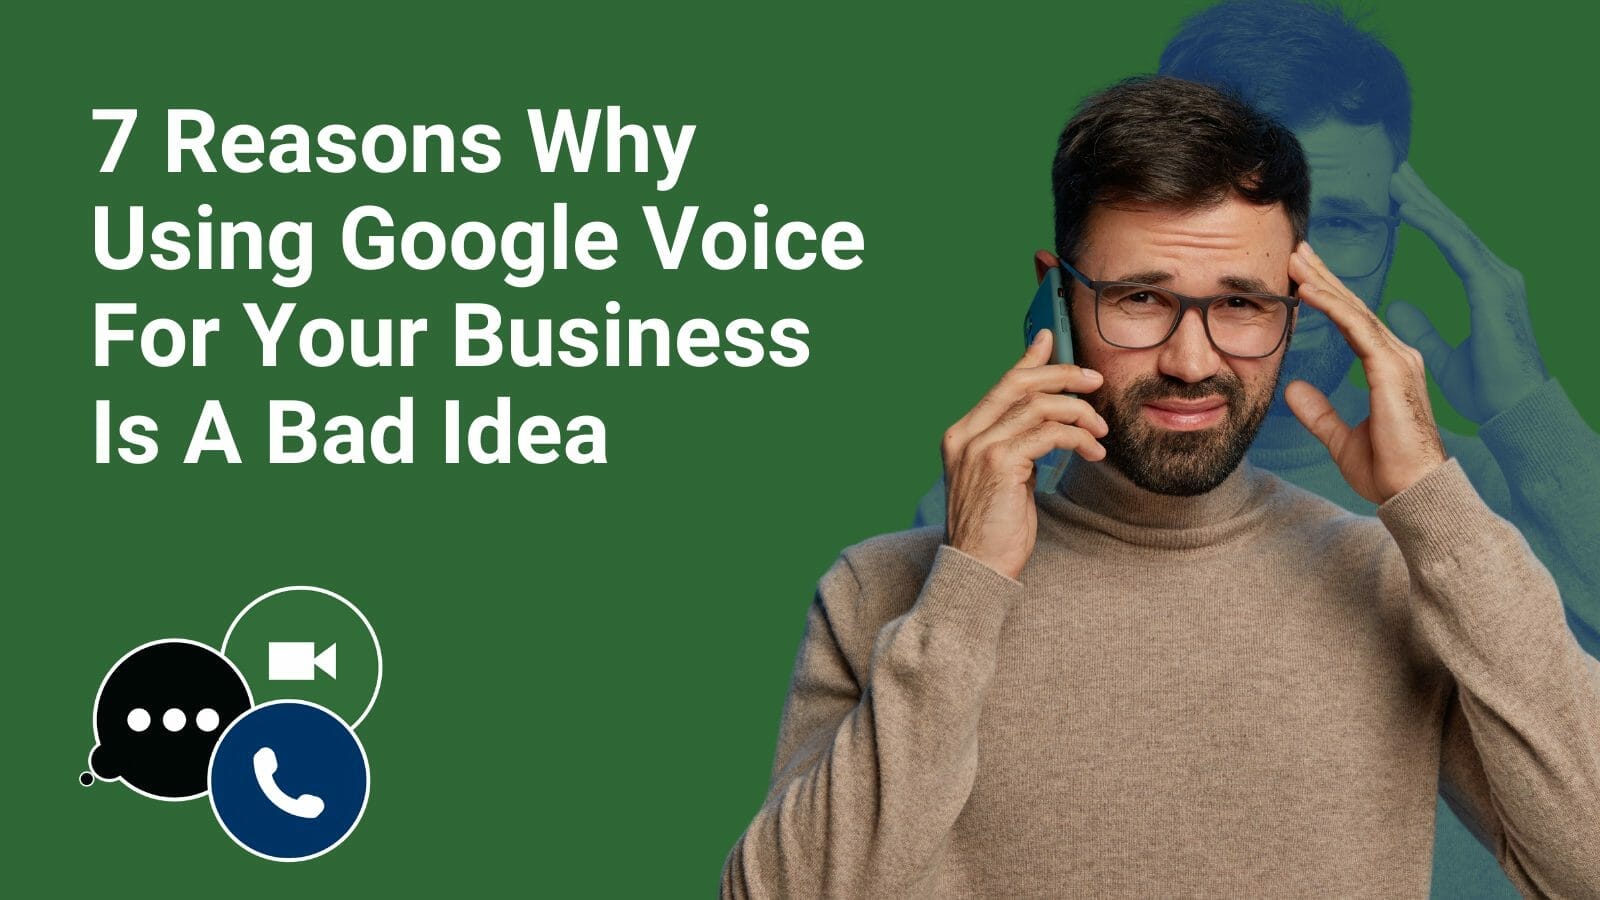 7 Reasons Why Using Google Voice For Your Business Is A Bad Idea